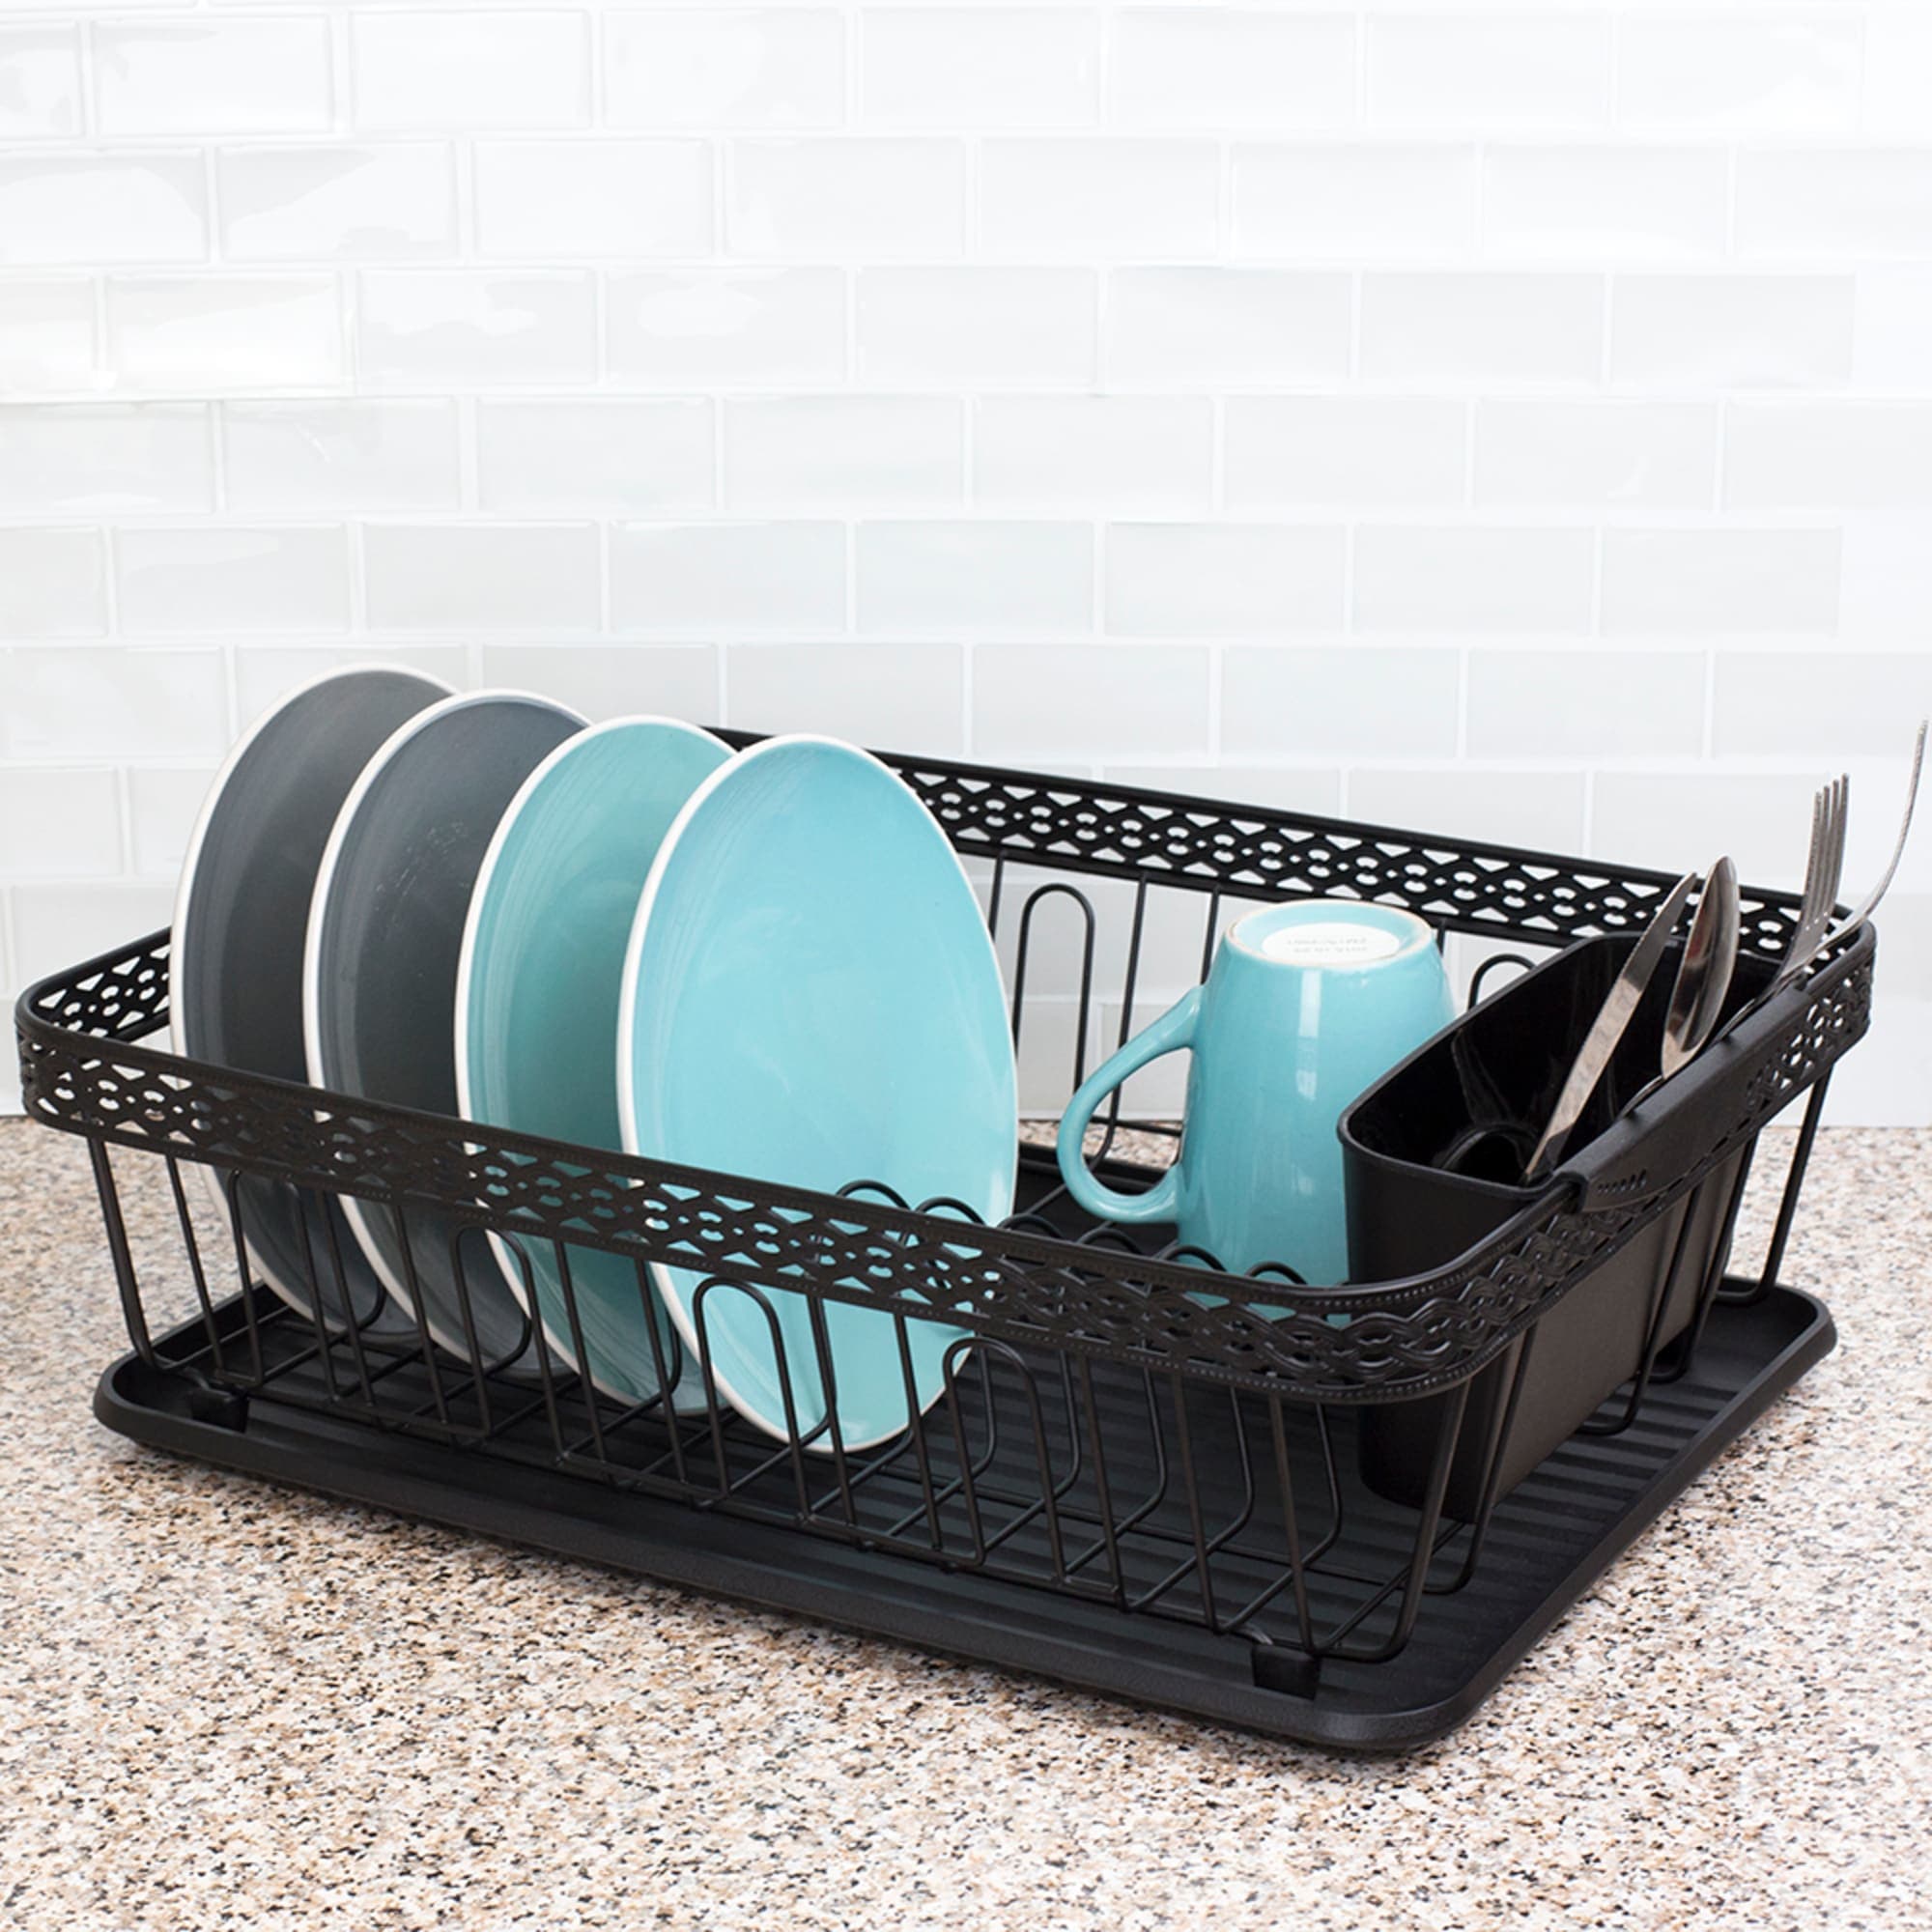 Home Basics 3 Piece Decorative Wire Dish Rack, Black $20.00 EACH, CASE PACK OF 6